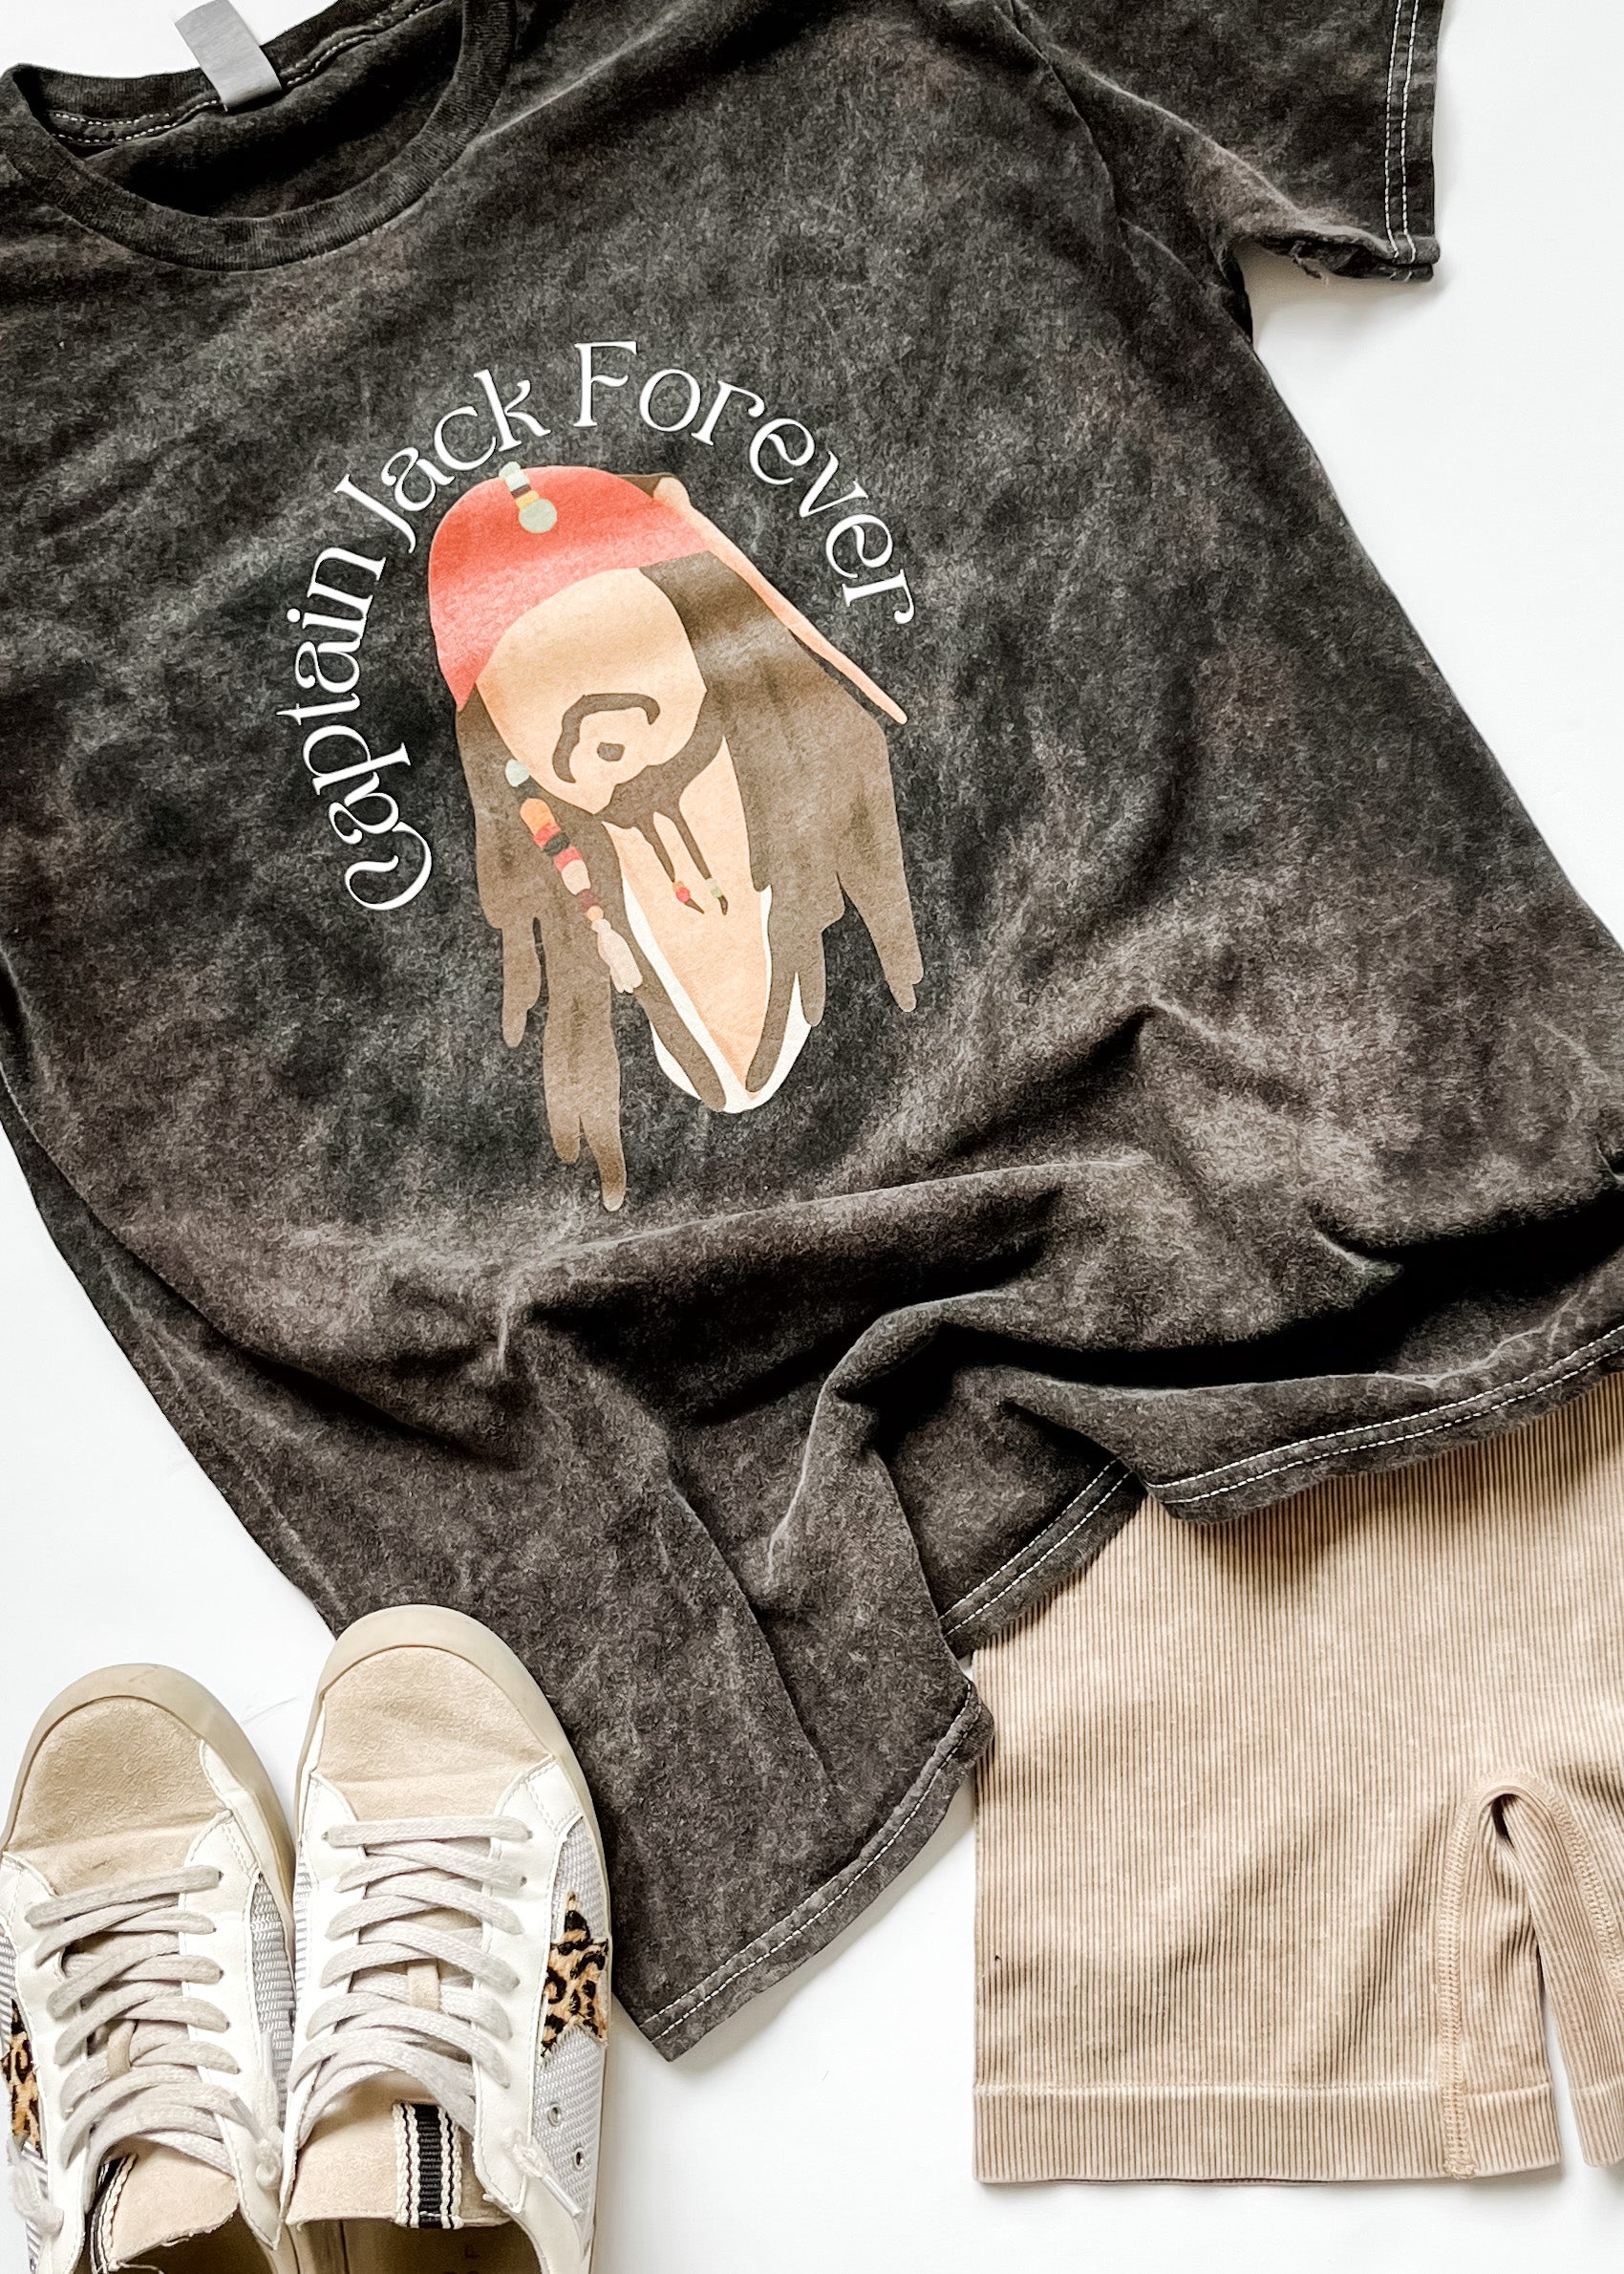 Captain Jack Forever | Mineral Wash Tee | Adult-Sister Shirts-Sister Shirts, Cute & Custom Tees for Mama & Littles in Trussville, Alabama.